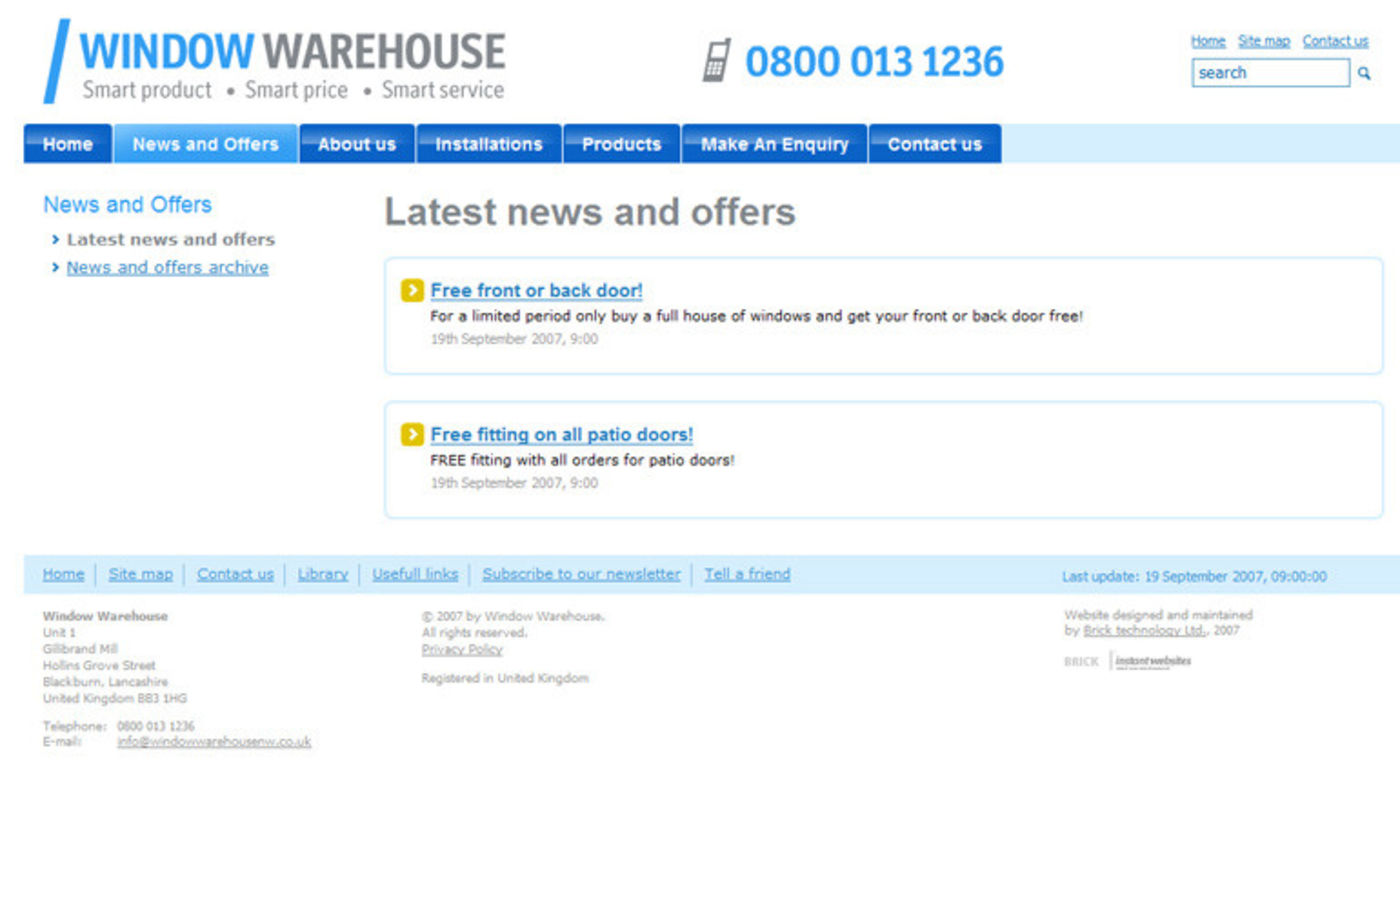 Window Warehouse Latest news and offers